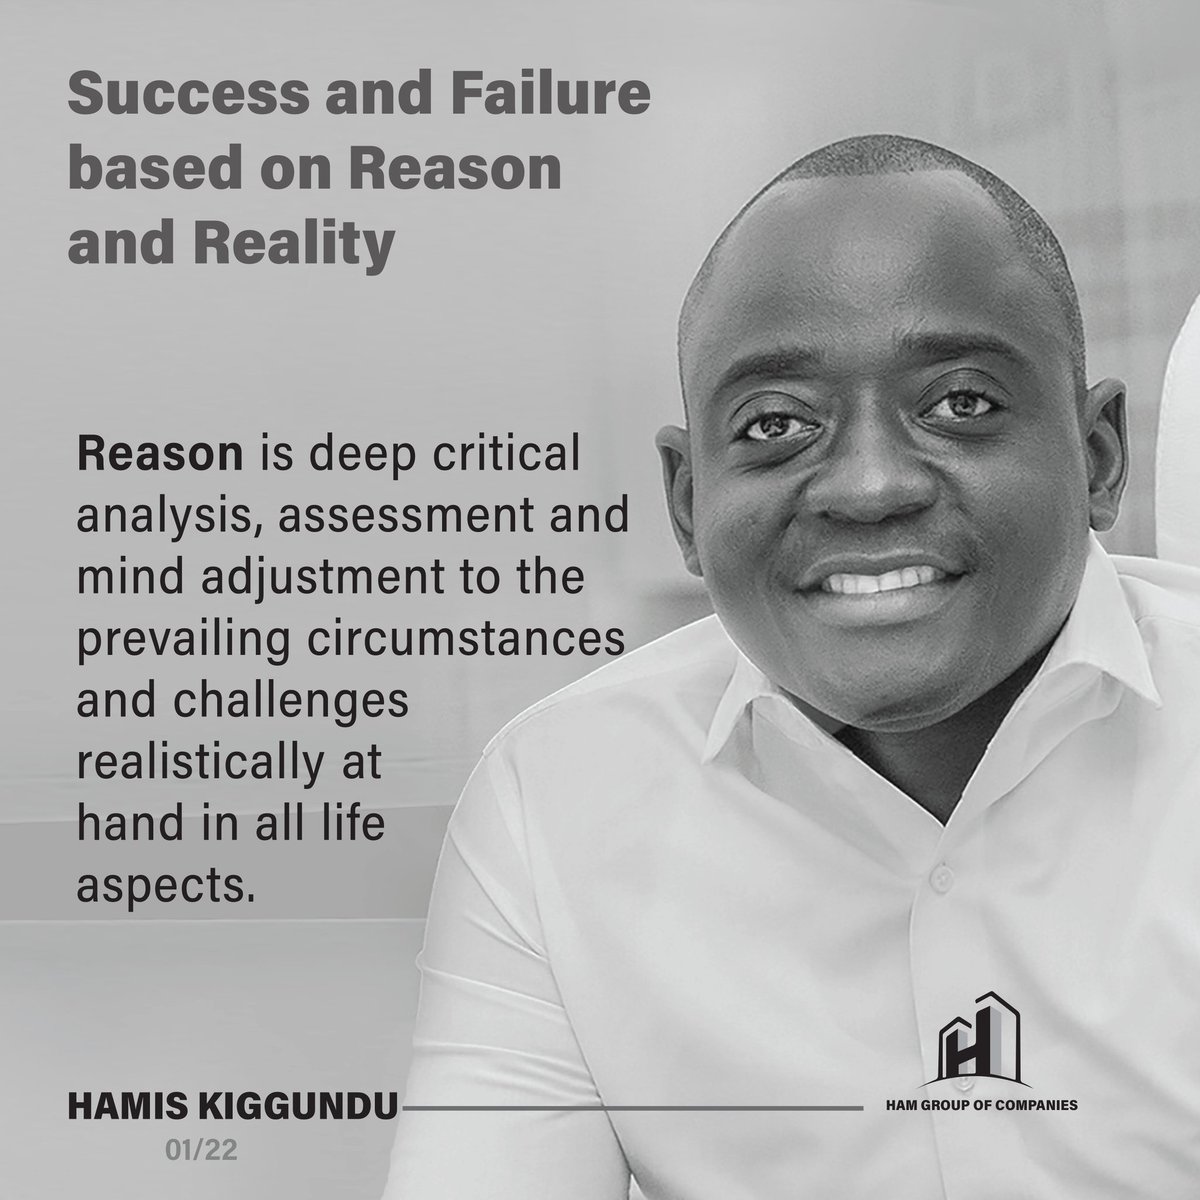 Today's quote @Hamenterprise .
Quote from success and failure based on reason and reality.